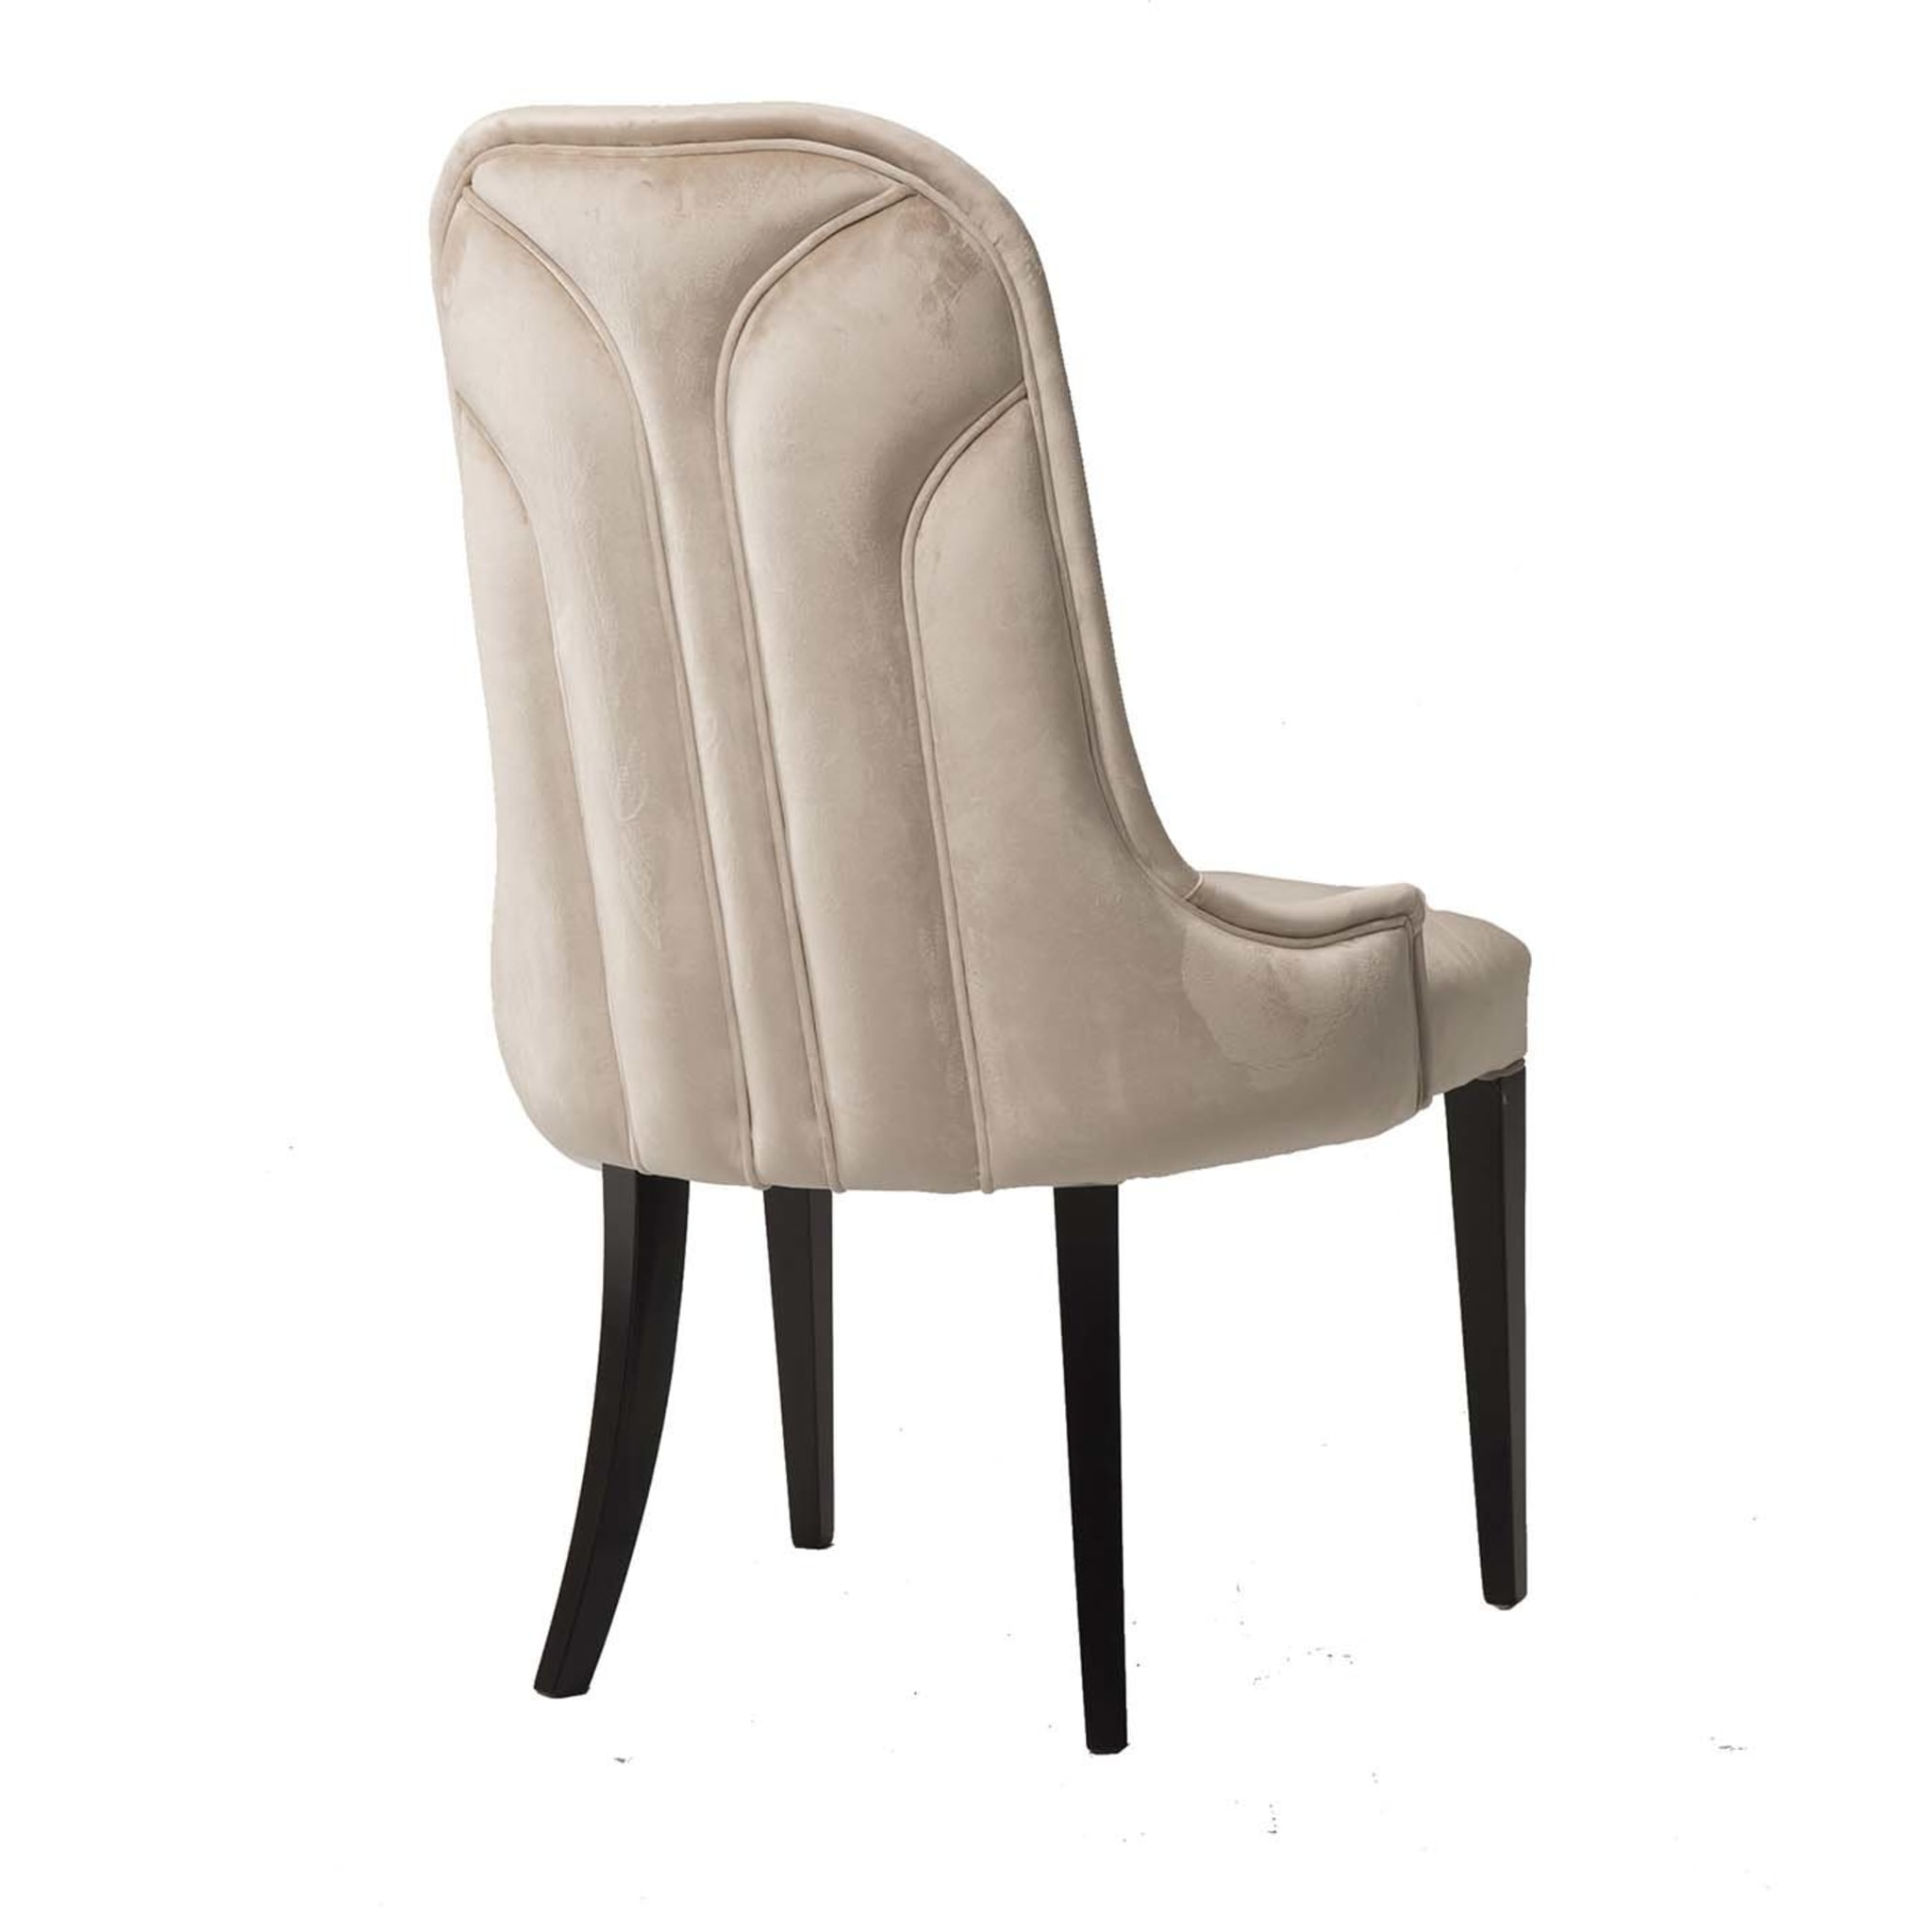 Wave White Dining Chair - Alternative view 1